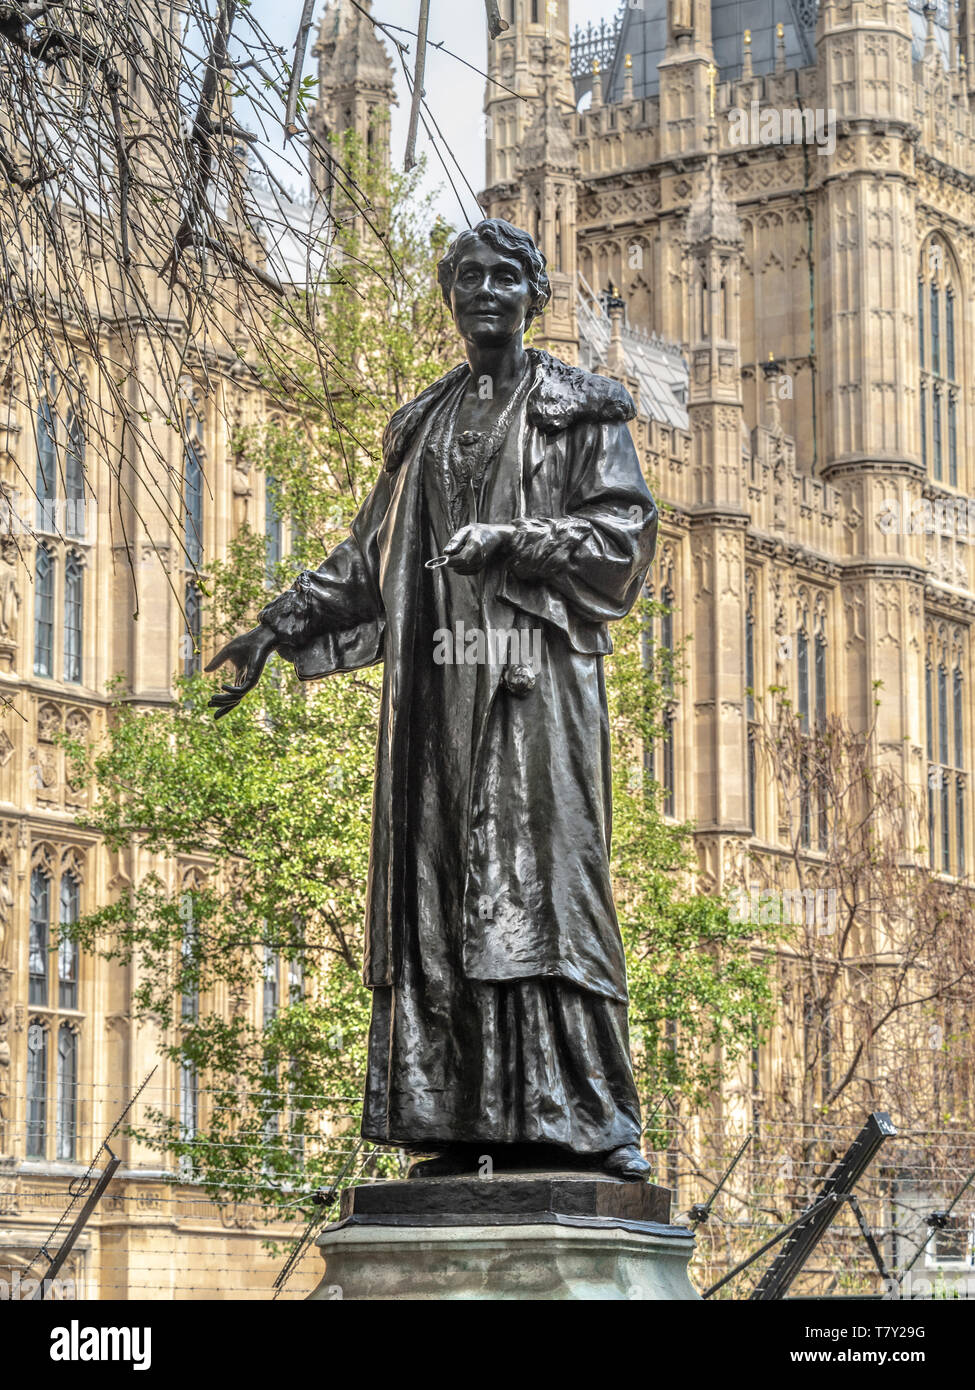 Bronze statue of Emmeline Pankhurst by Arthur George Walker situated in the Victoria Tower Gardens, Westminster, London, UK. Unveiled in 1930. Stock Photo